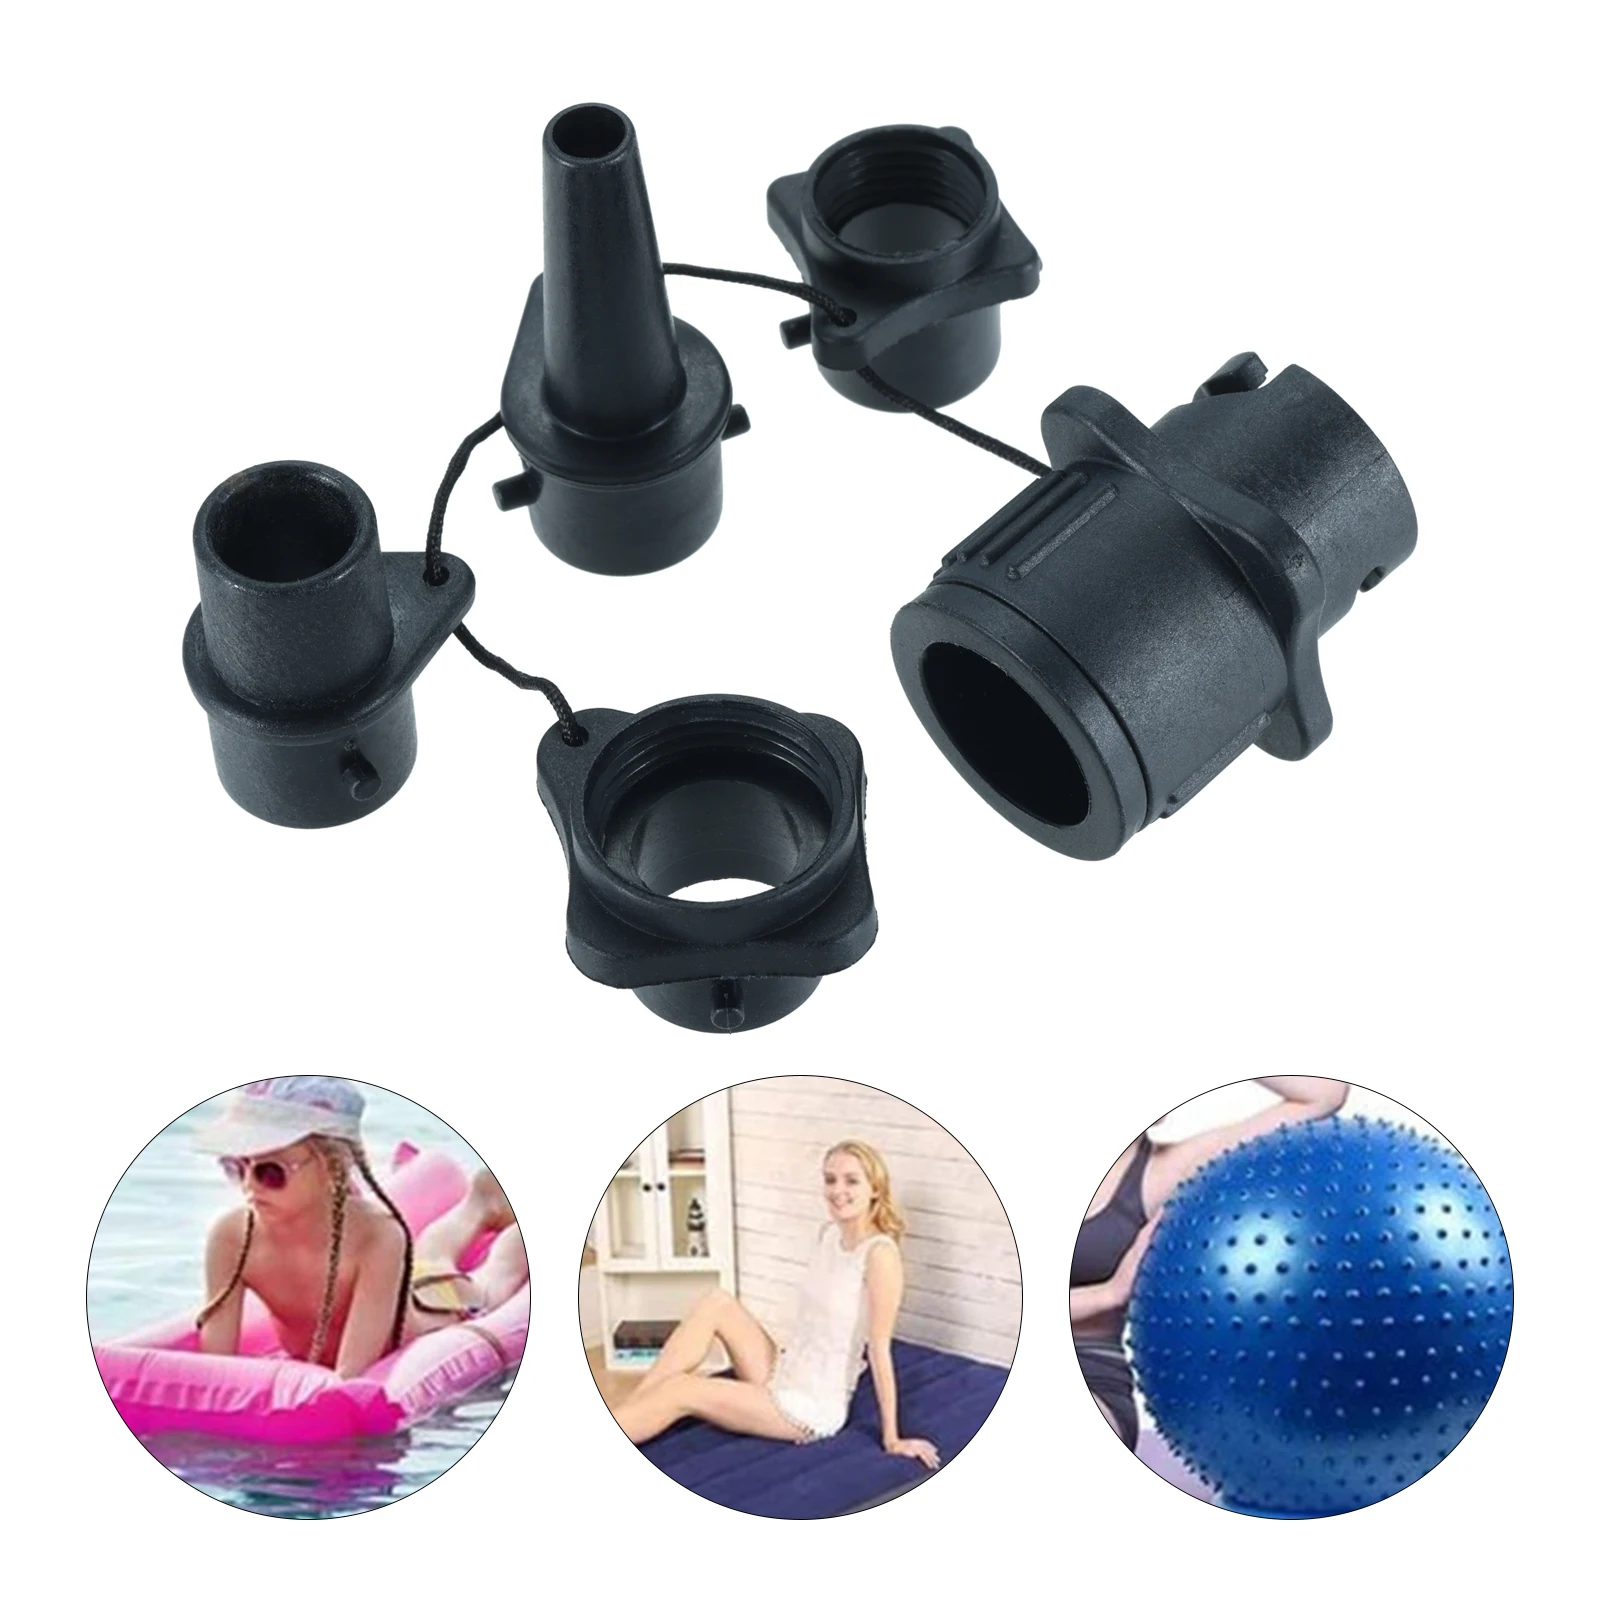 1 Set Air Valve Nozzle Adapter Kit Black Plastic Multi-Function Hose Connector Surf Paddle Board Canoe Inflatable Boat Accessory 1pc dia hookah silicone hose connector shisha adapter for led art mp5 chicha narguile connection pipes nargile accessory part